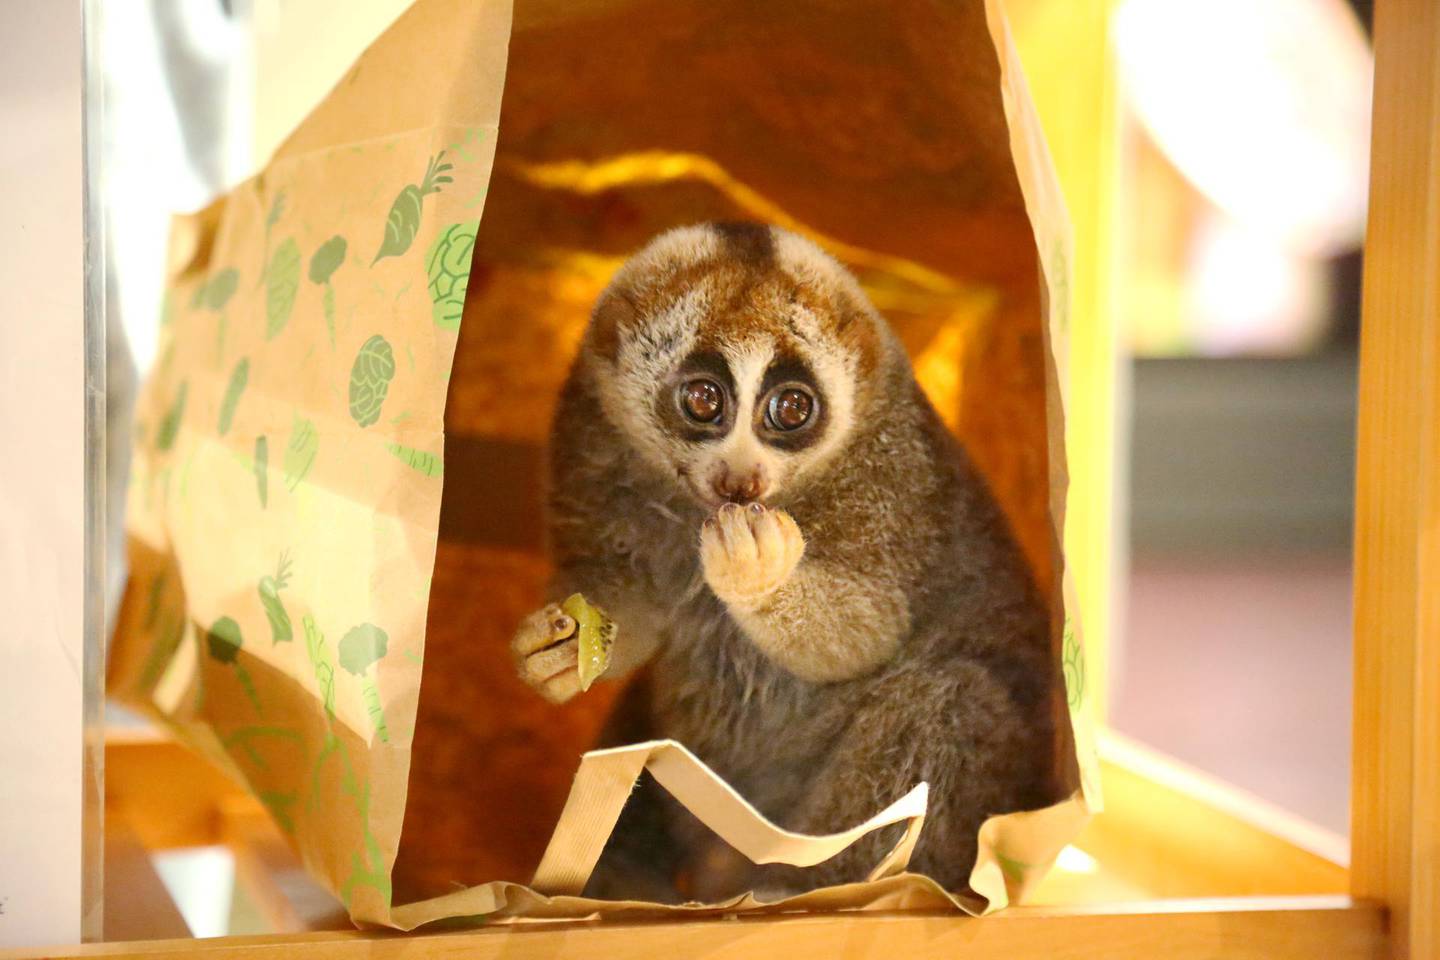 The Green Planet and the Ministry of Climate Change and Environment have teamed up to offer the Slow Loris a new home. Courtesy The Green Planet